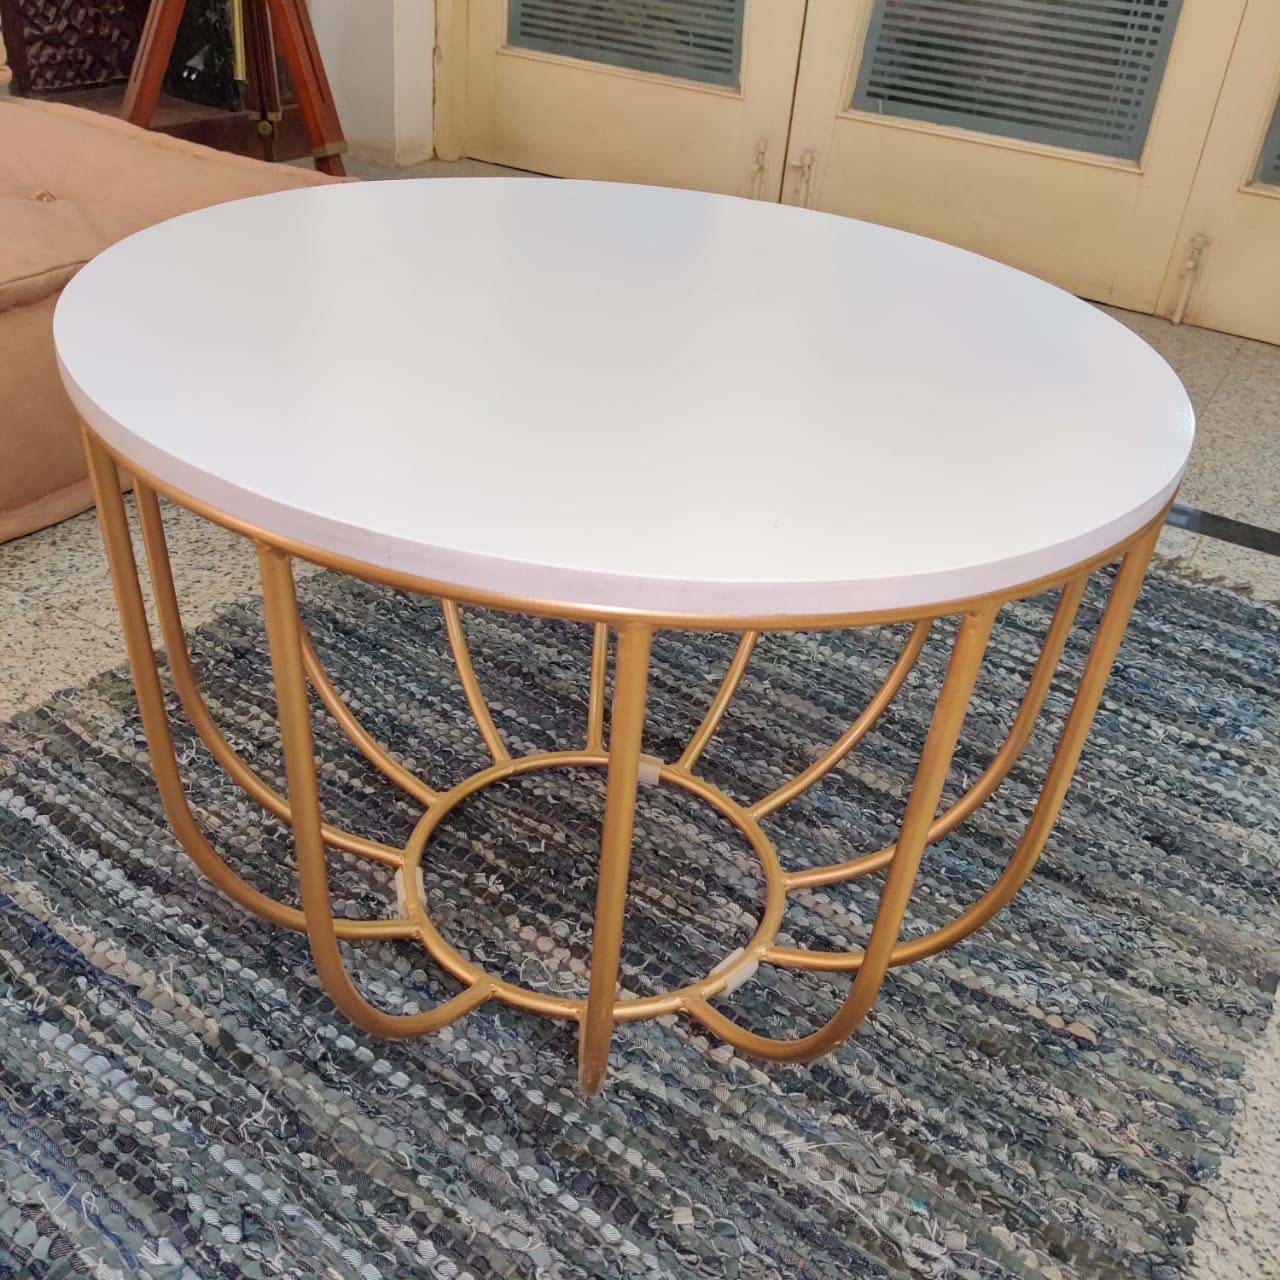 A coffee table with a circular top and curved legs